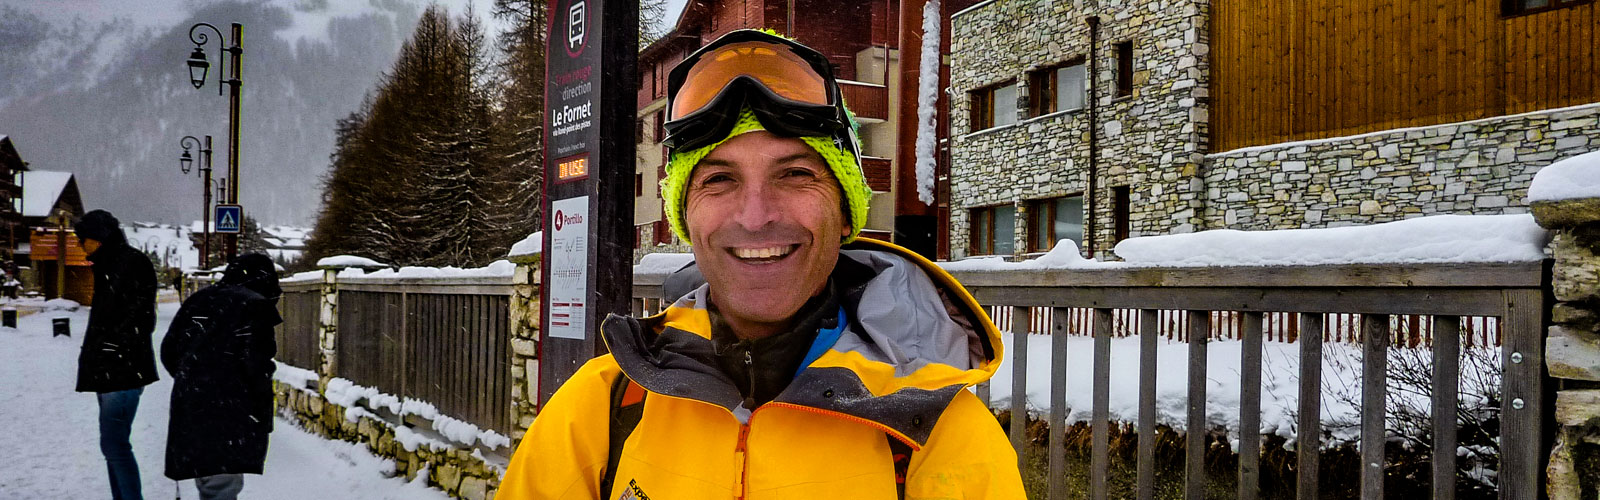 Pietro Barigazzi, UIAGM mountain guide with Alpine Experience Val d'Isere